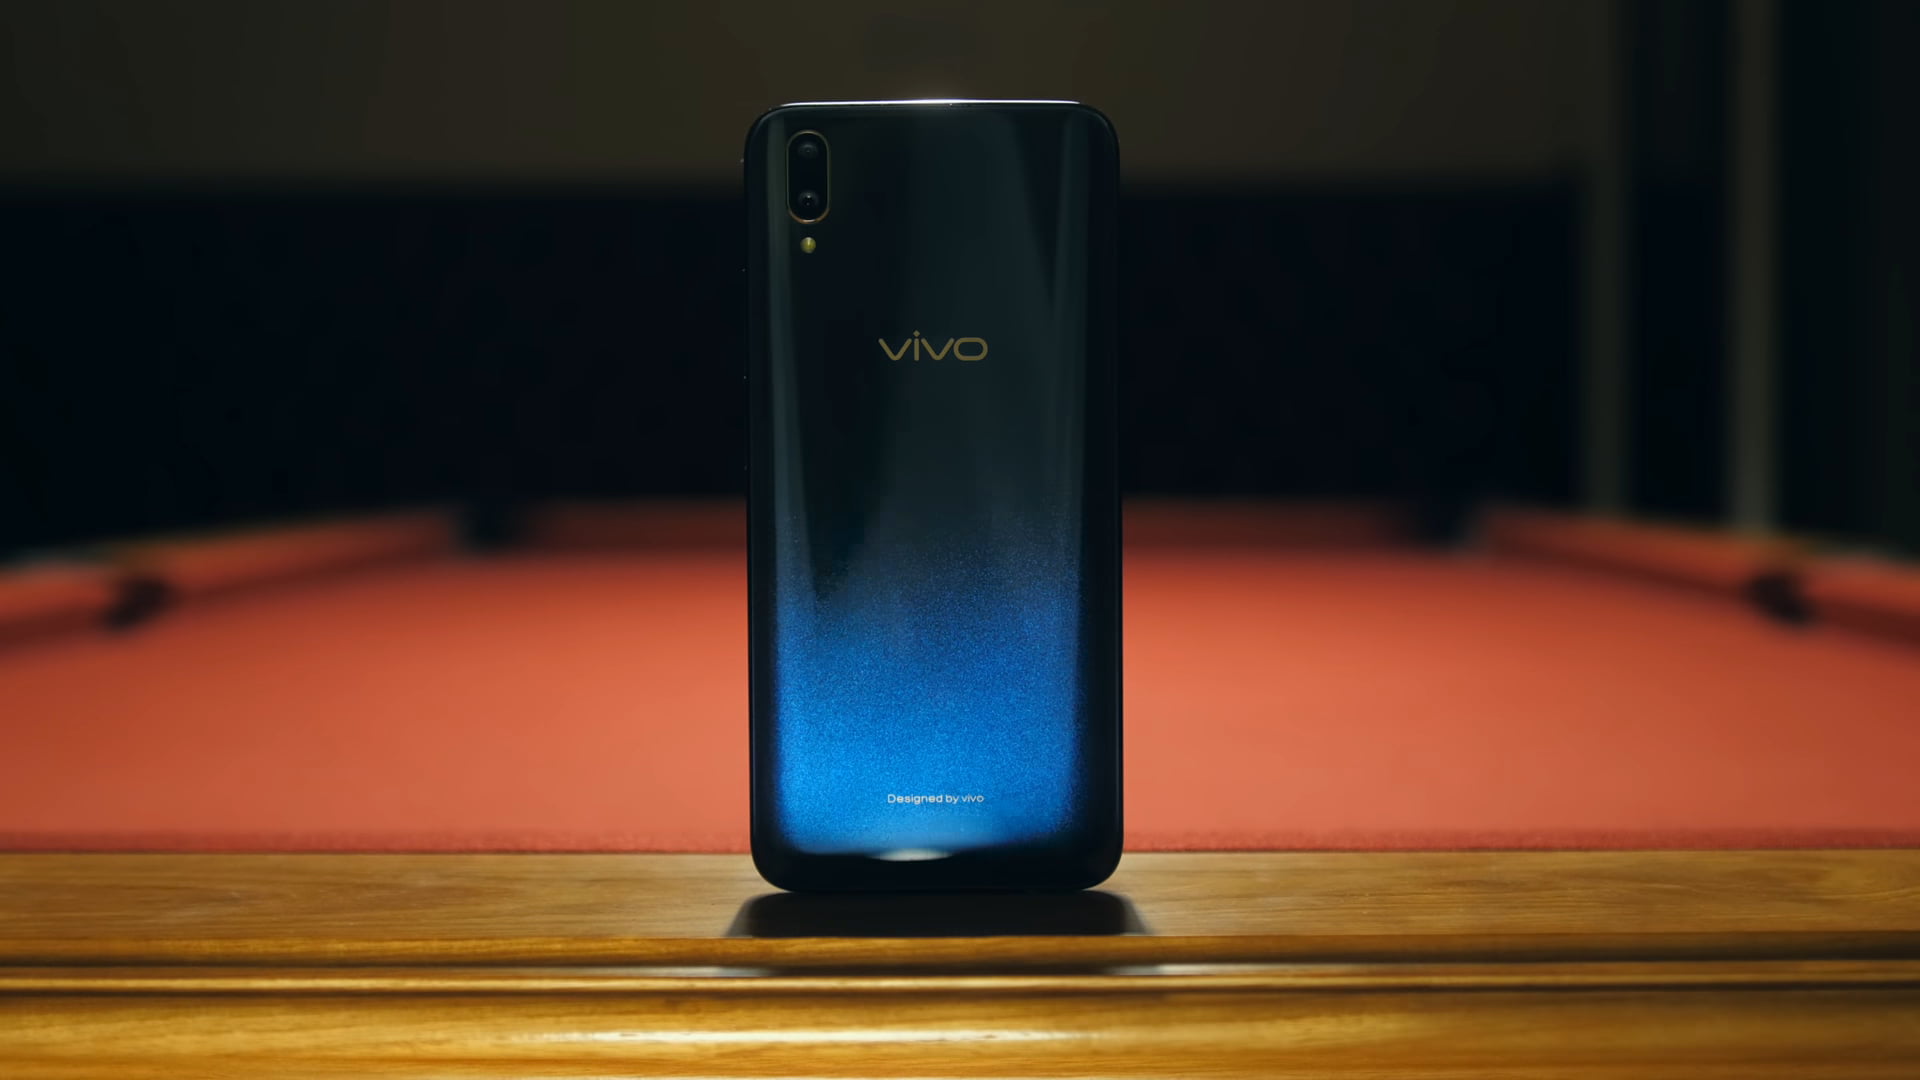 Vivo V11 With Halo Fullview Display Is Launching Today